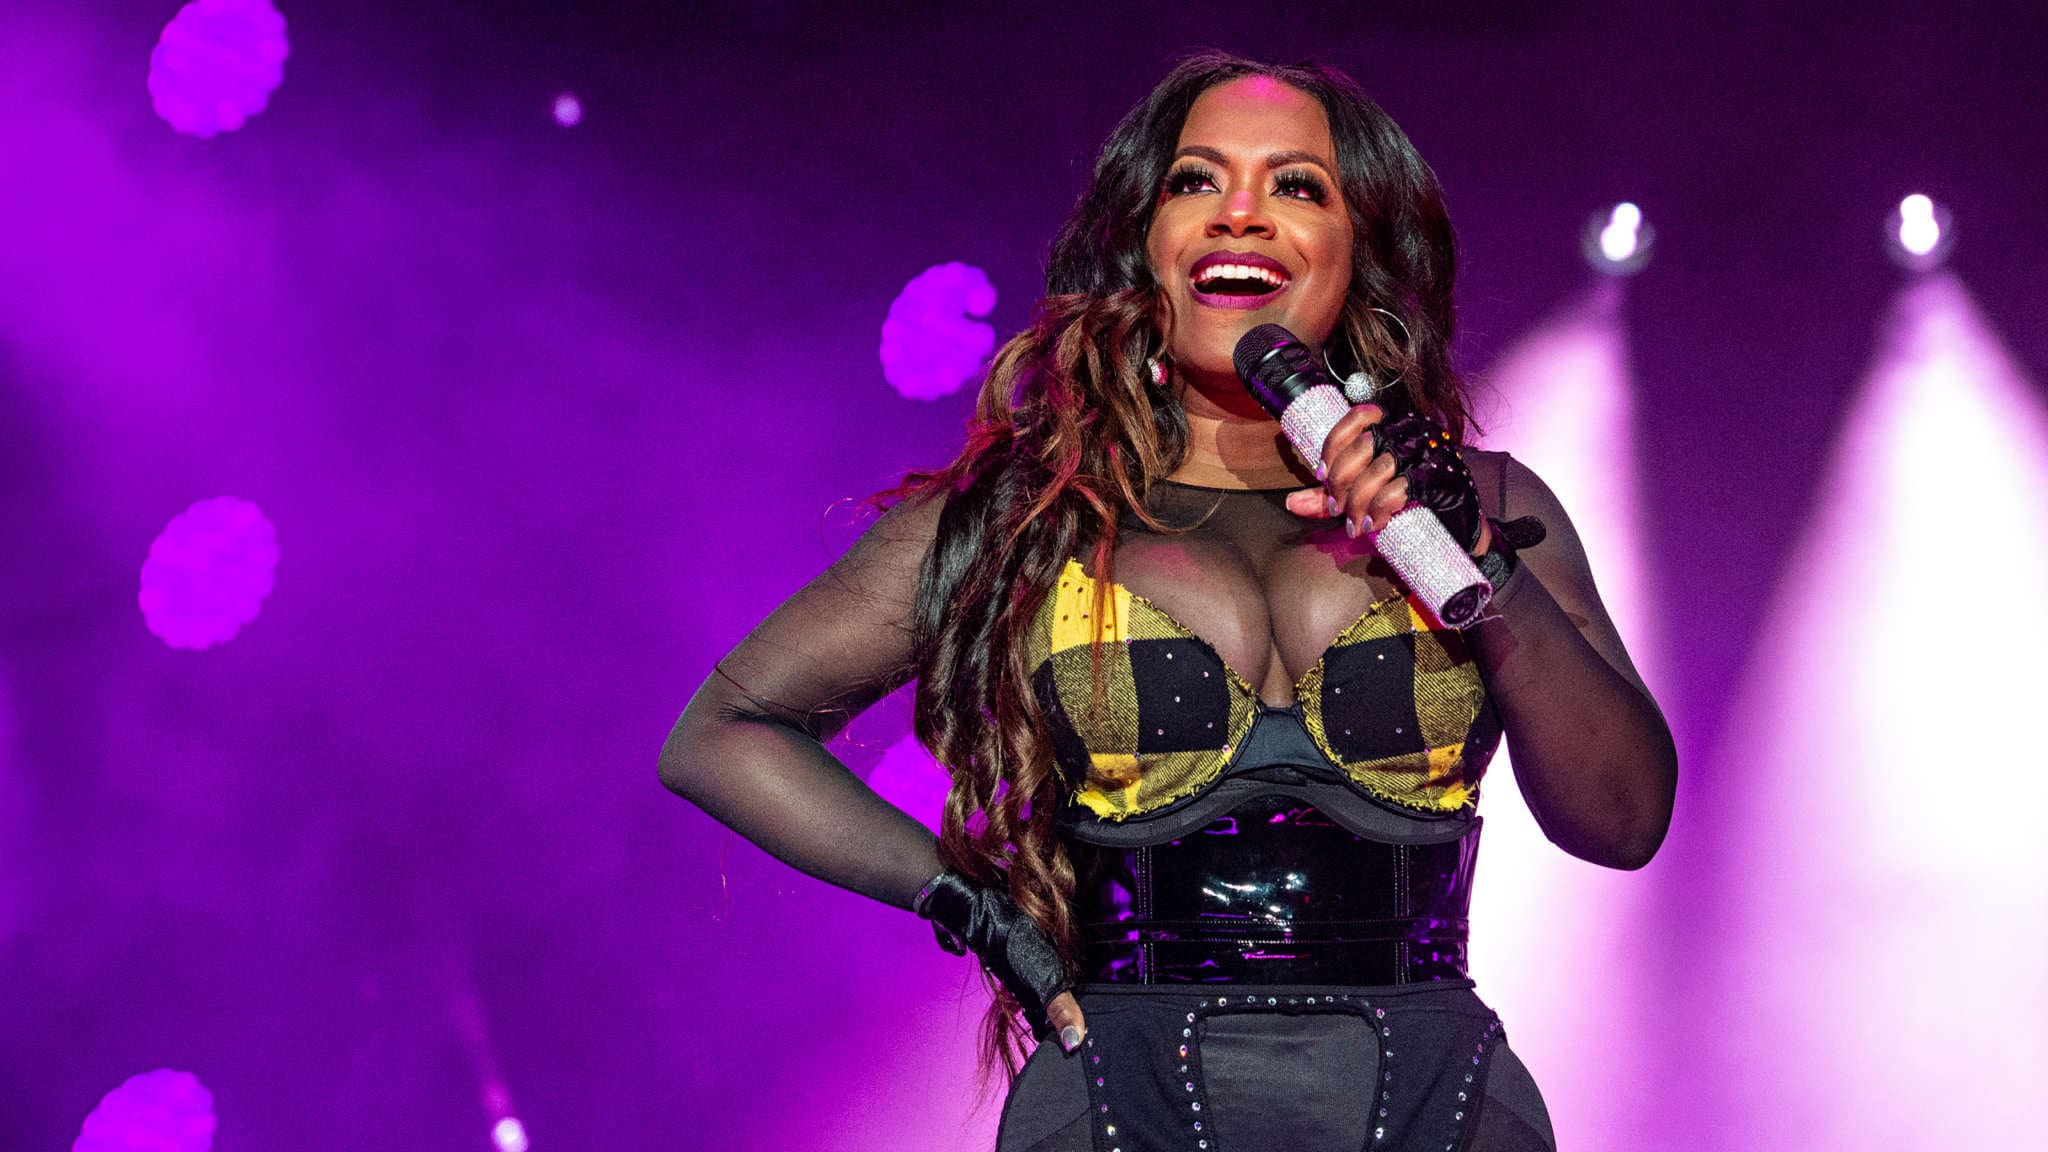 Kandi Burruss Looks Gorgeous With Black Hair And Purple Highlights - See Her Photo